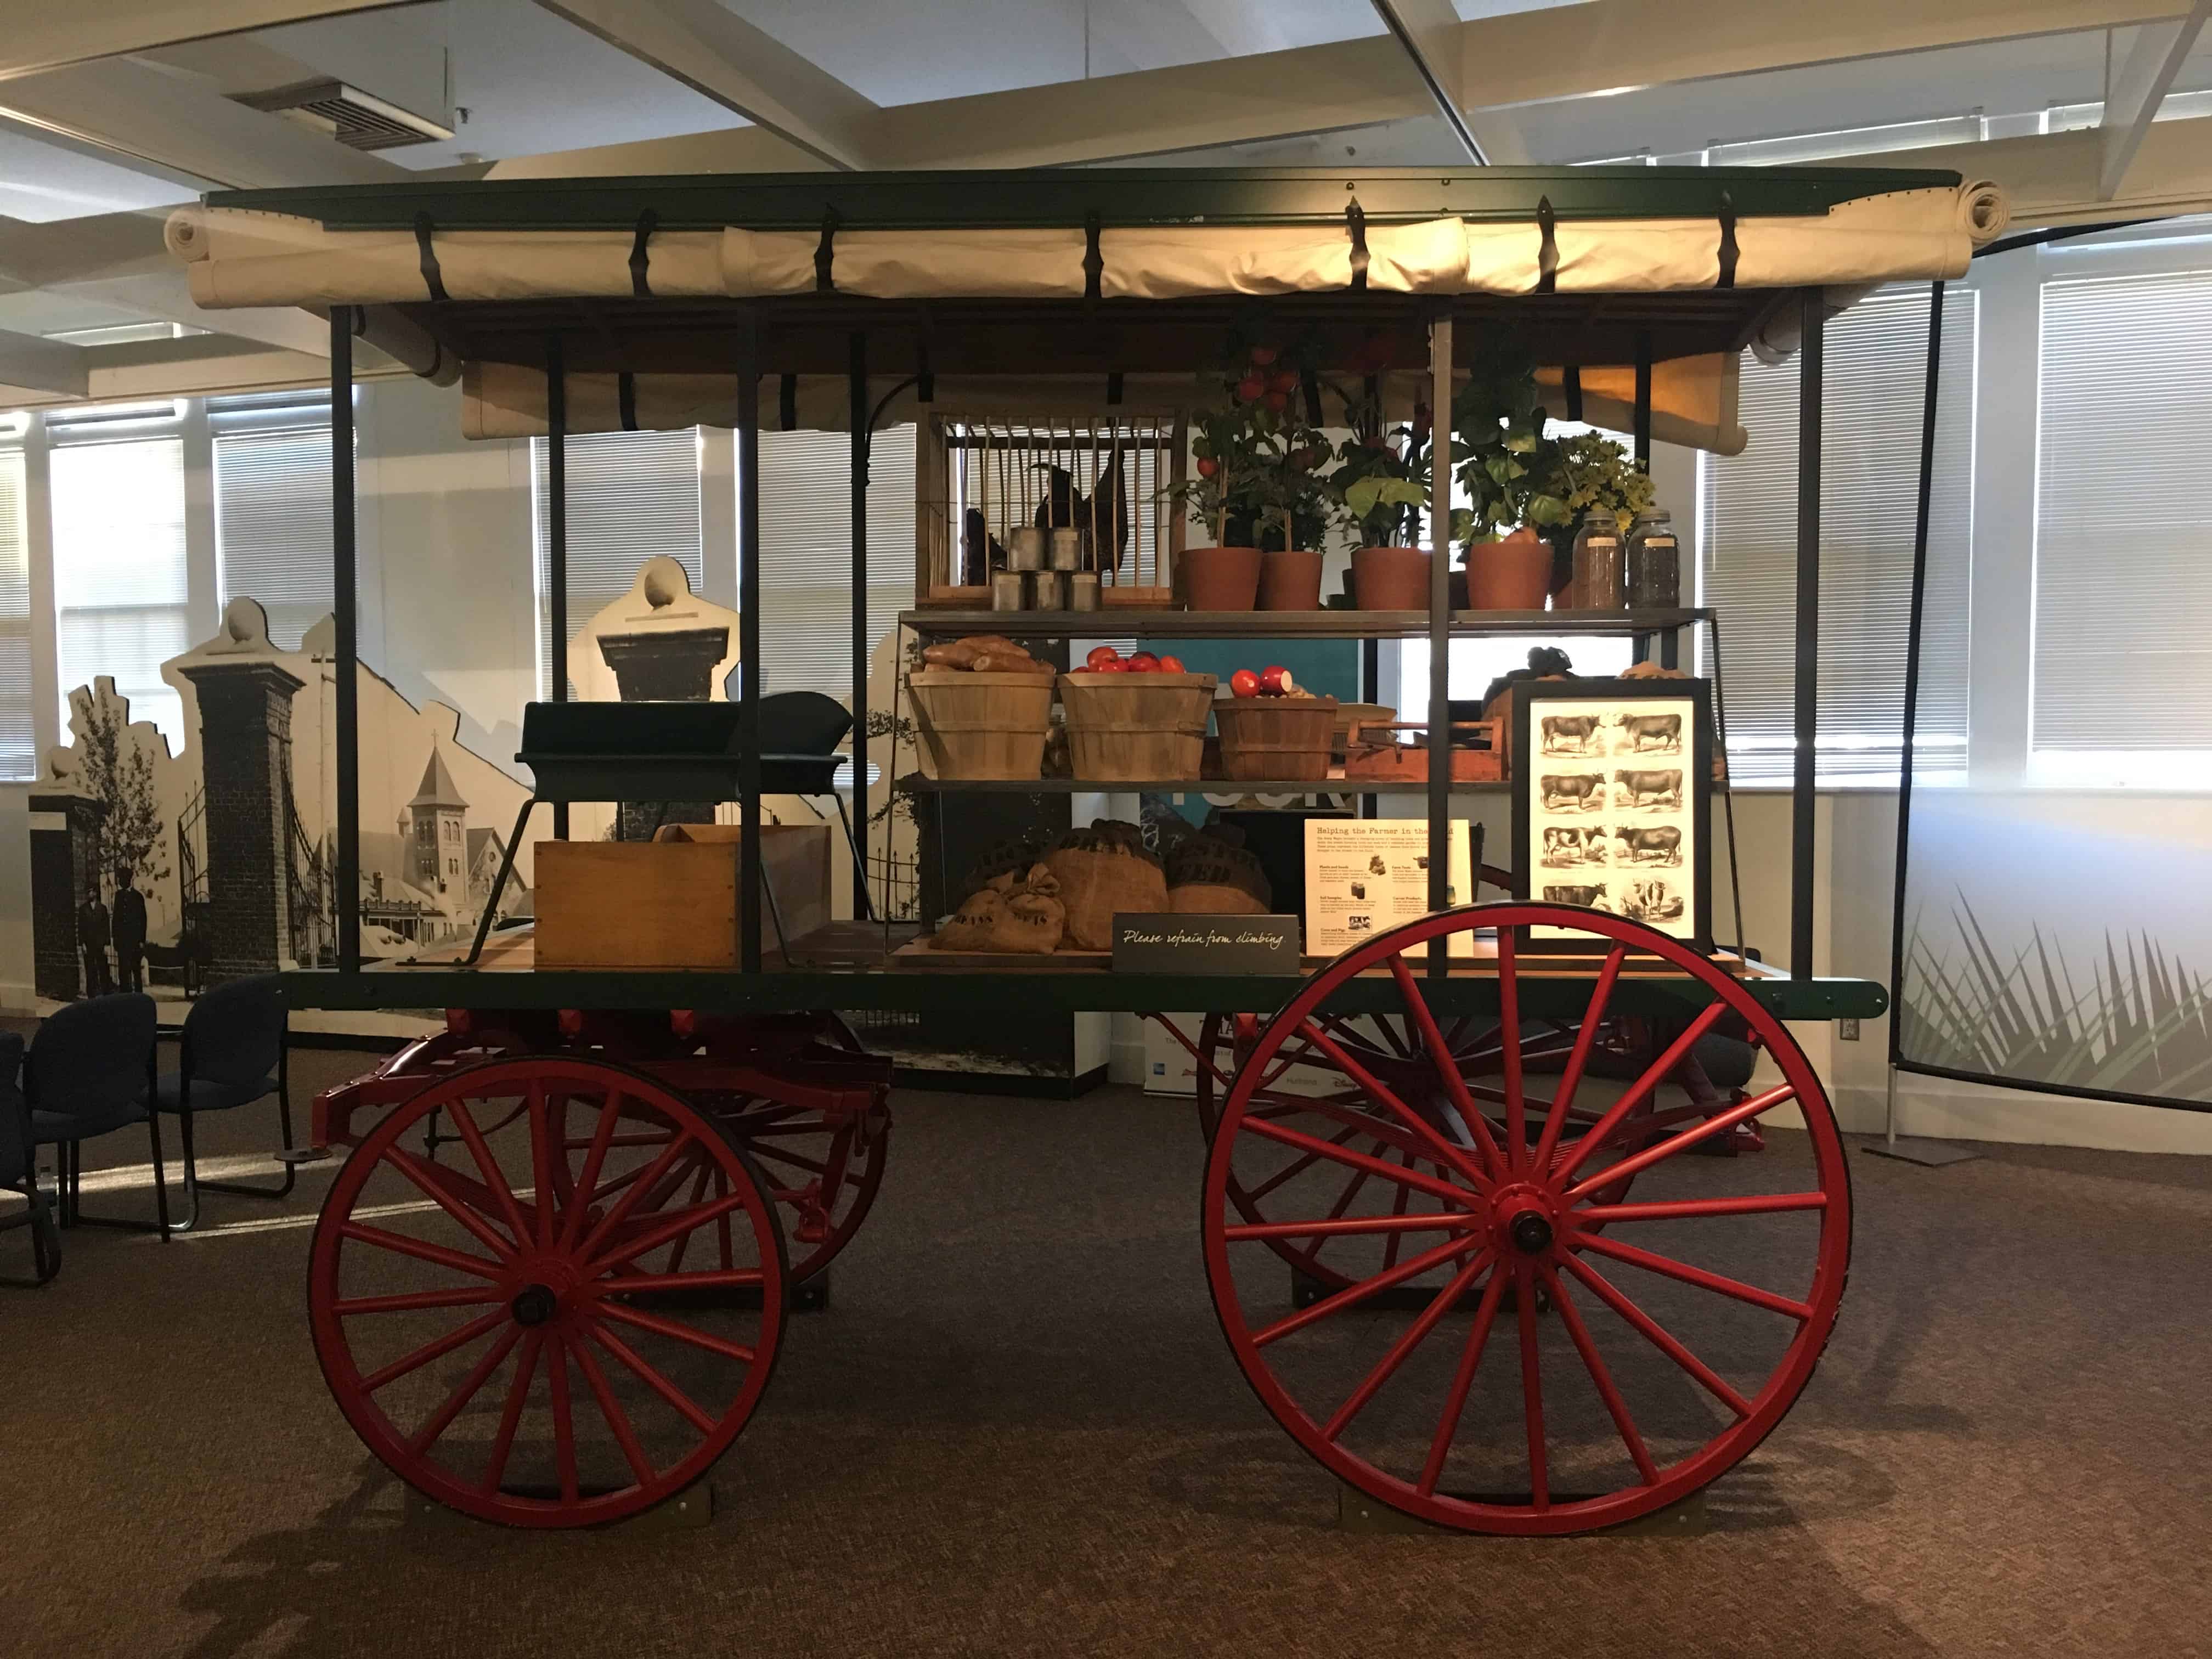 Carriage at the George Washington Carver Museum